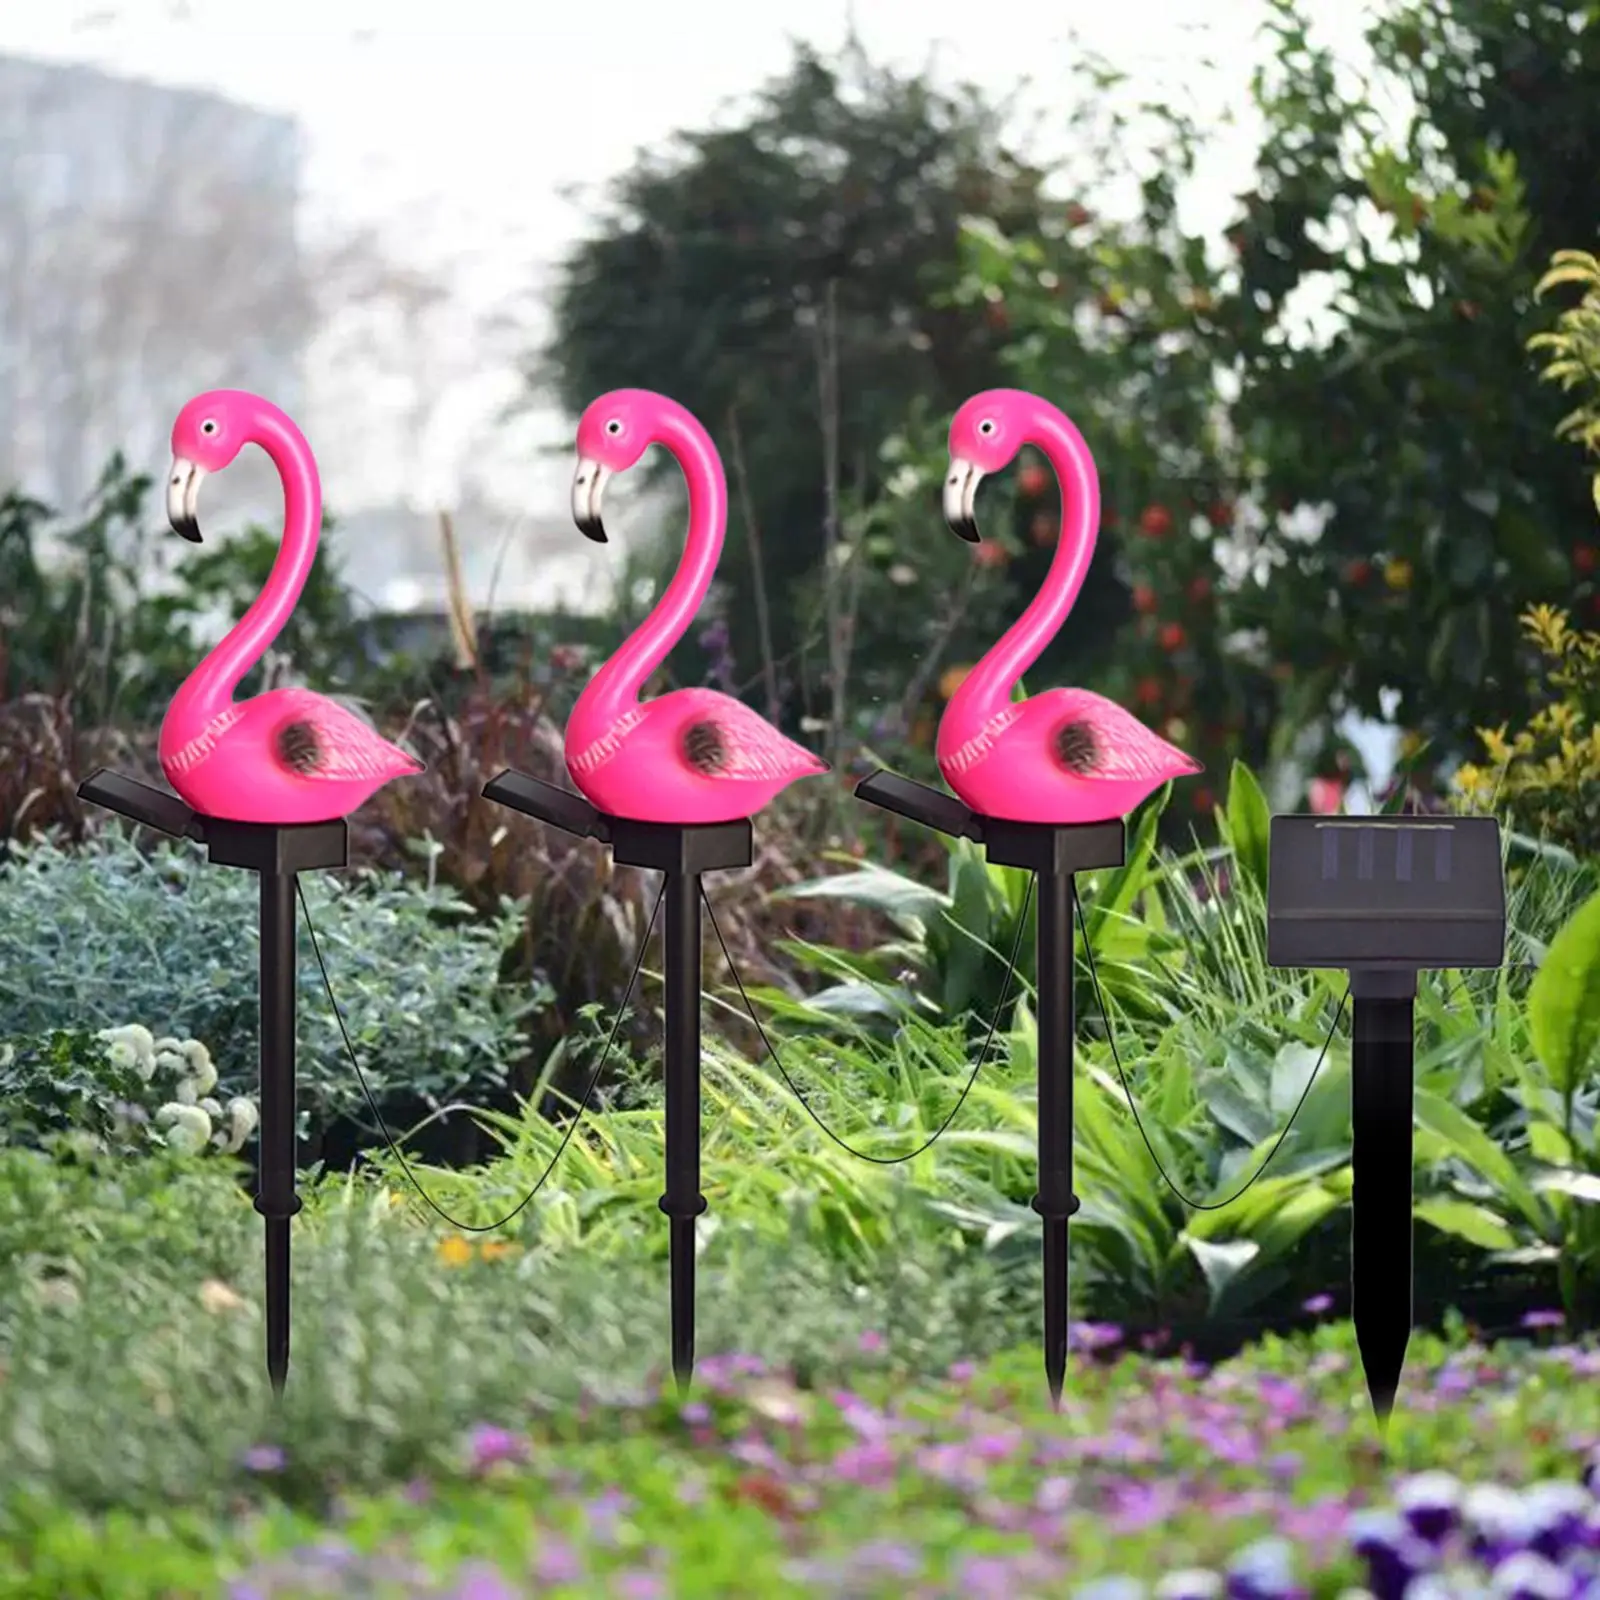 3 Pieces Flamingo Ornaments Landscape Decor Night Lighting Lawn Light Outdoor for Yard